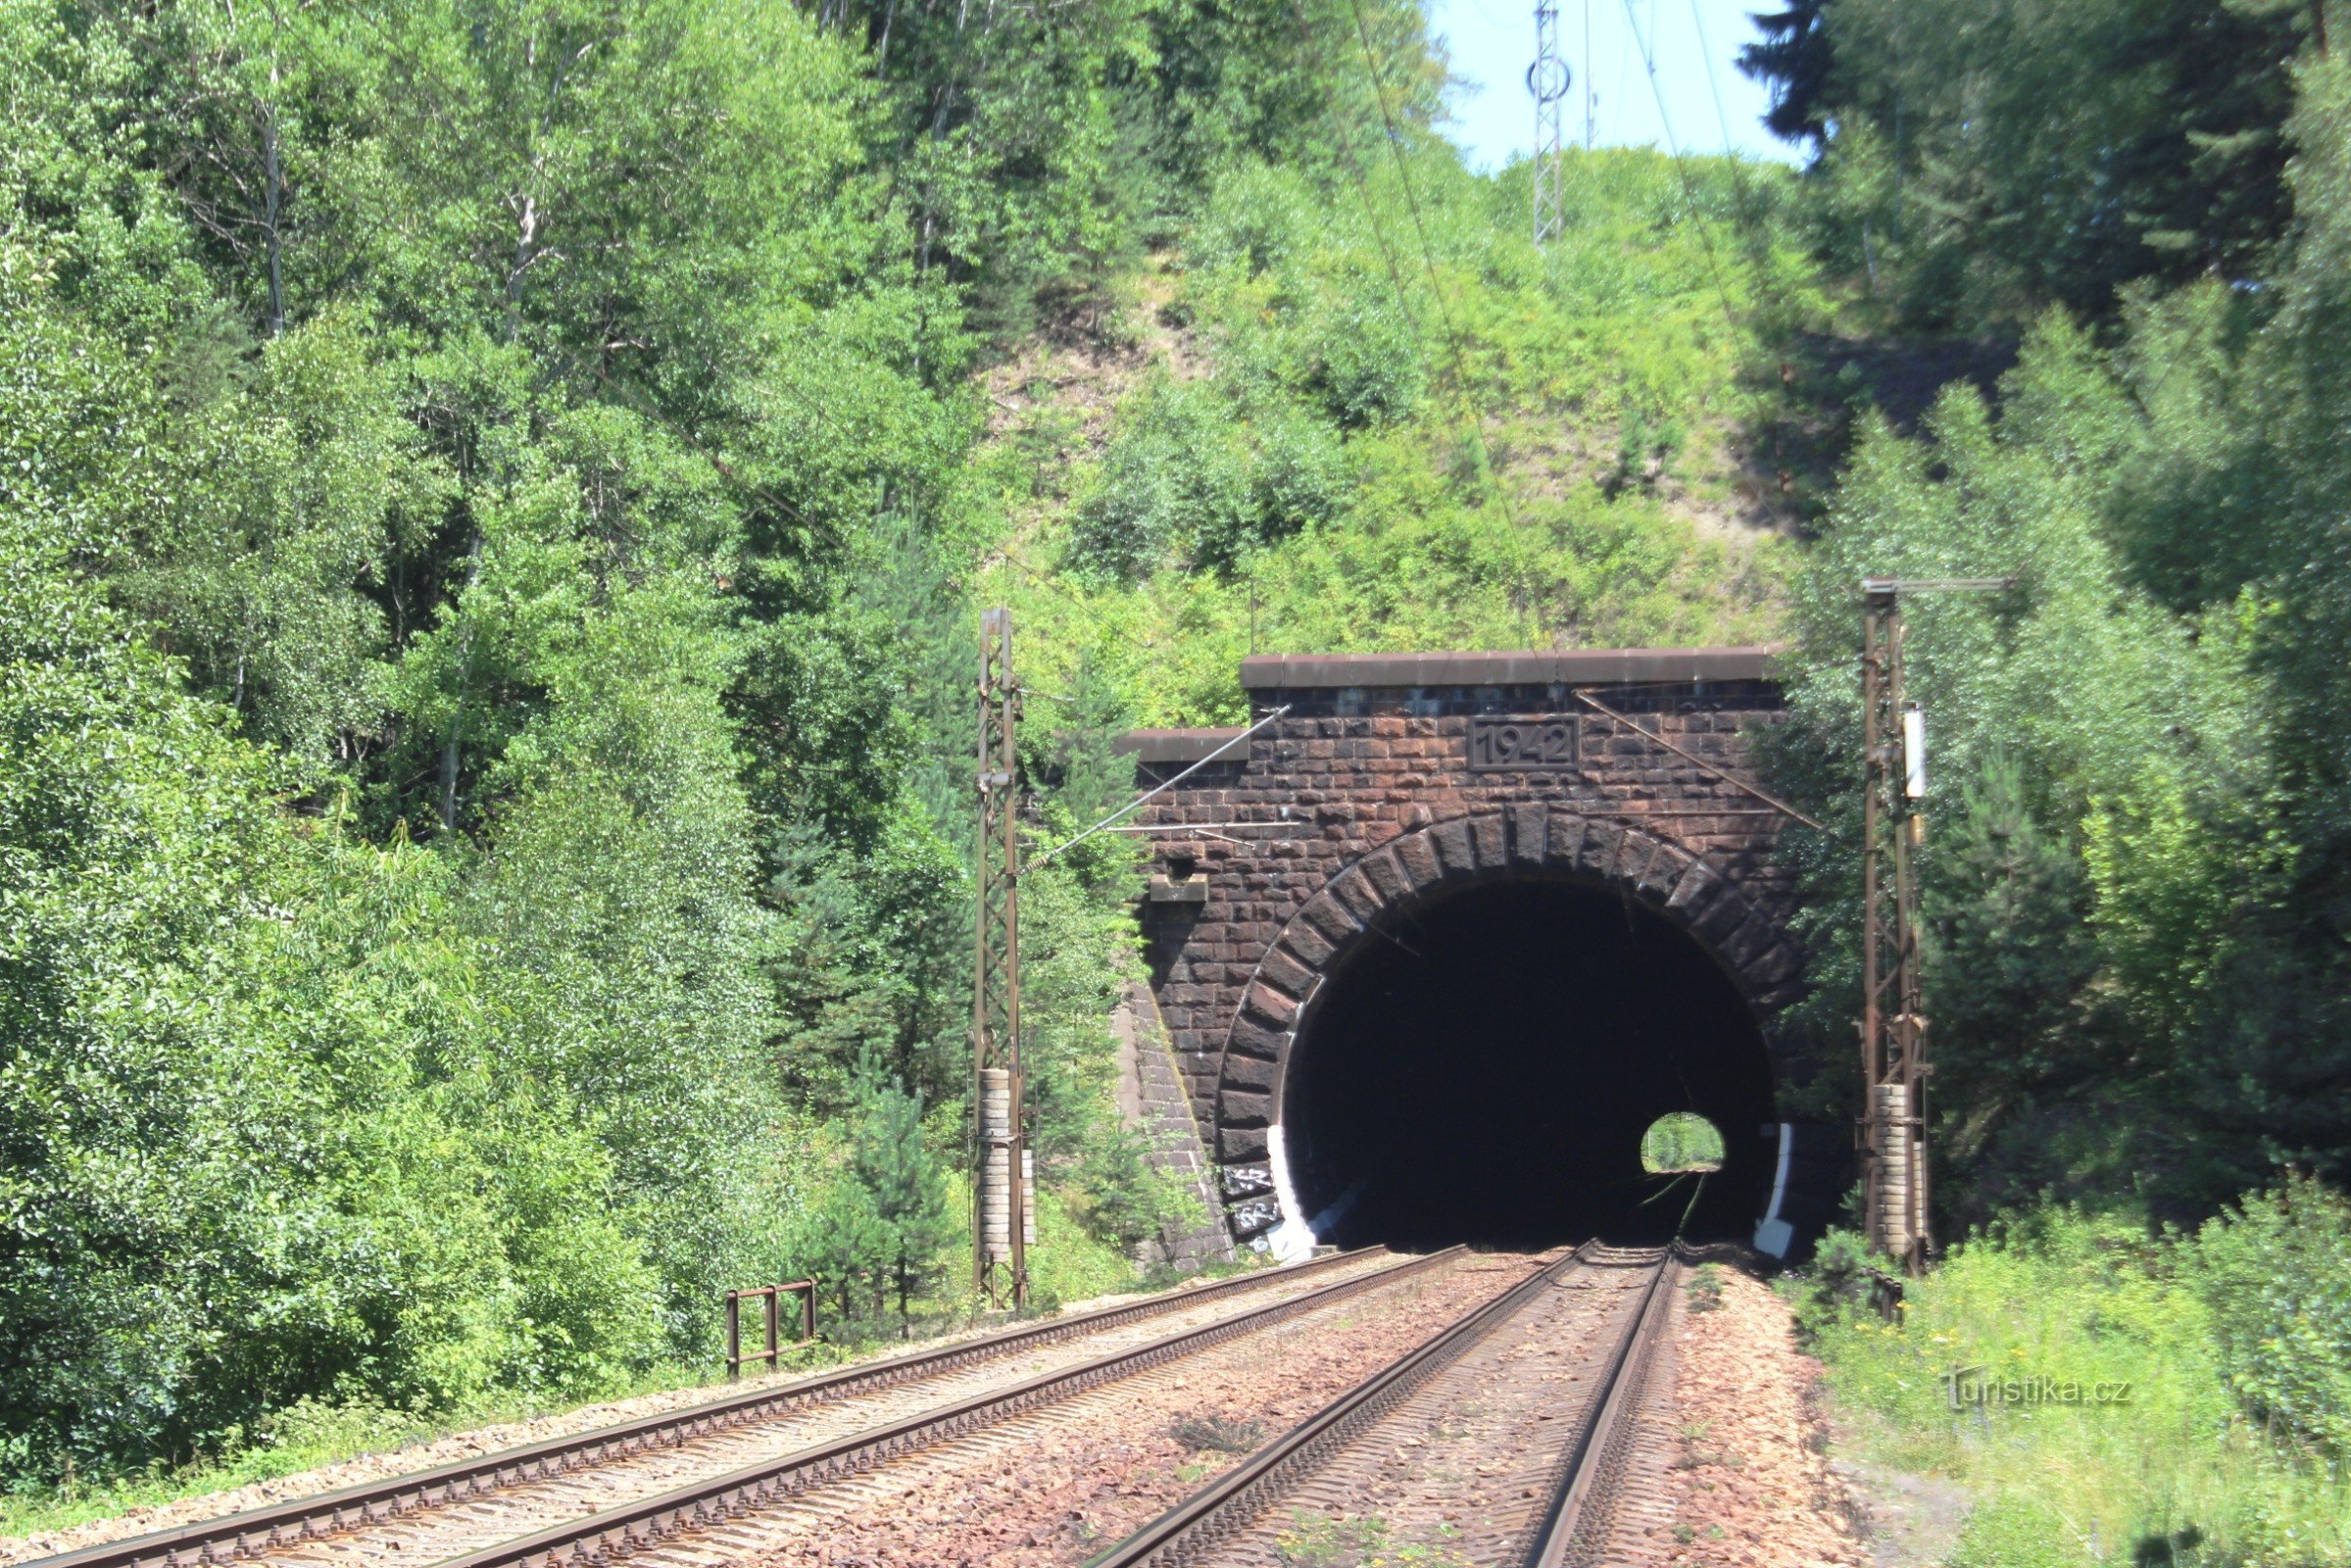 View through the upper tunnel